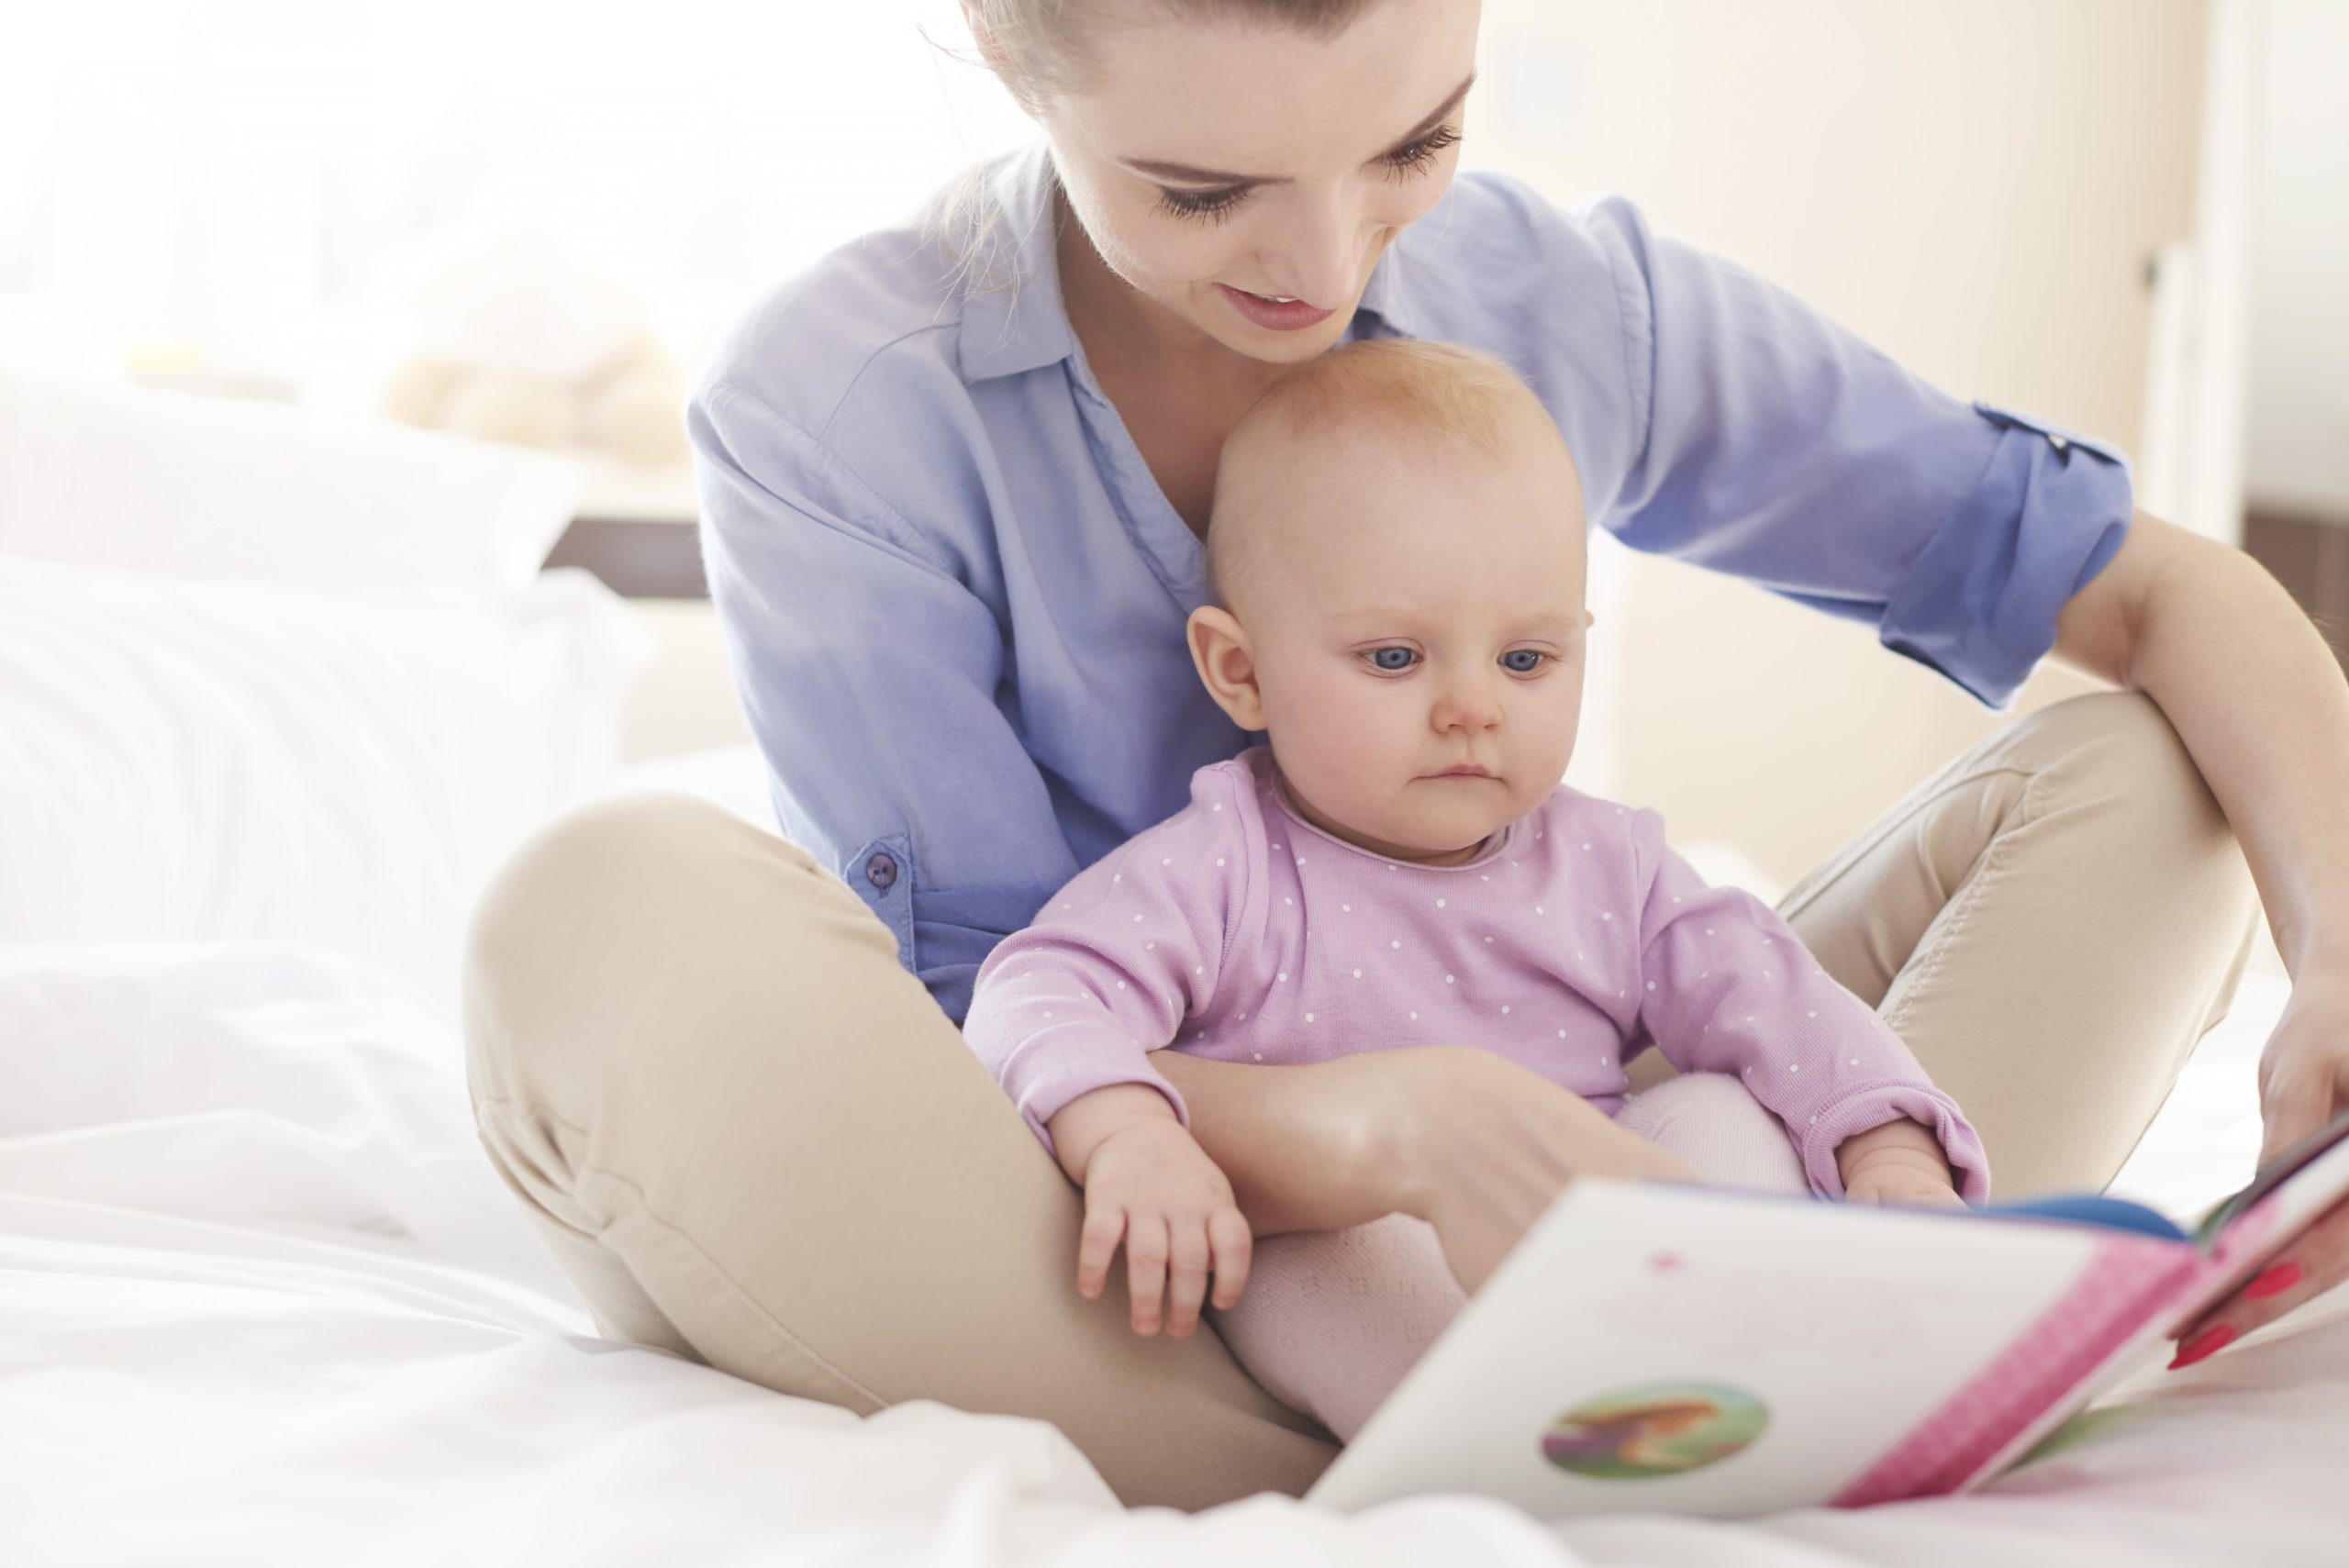 What types of books should I read to my baby?